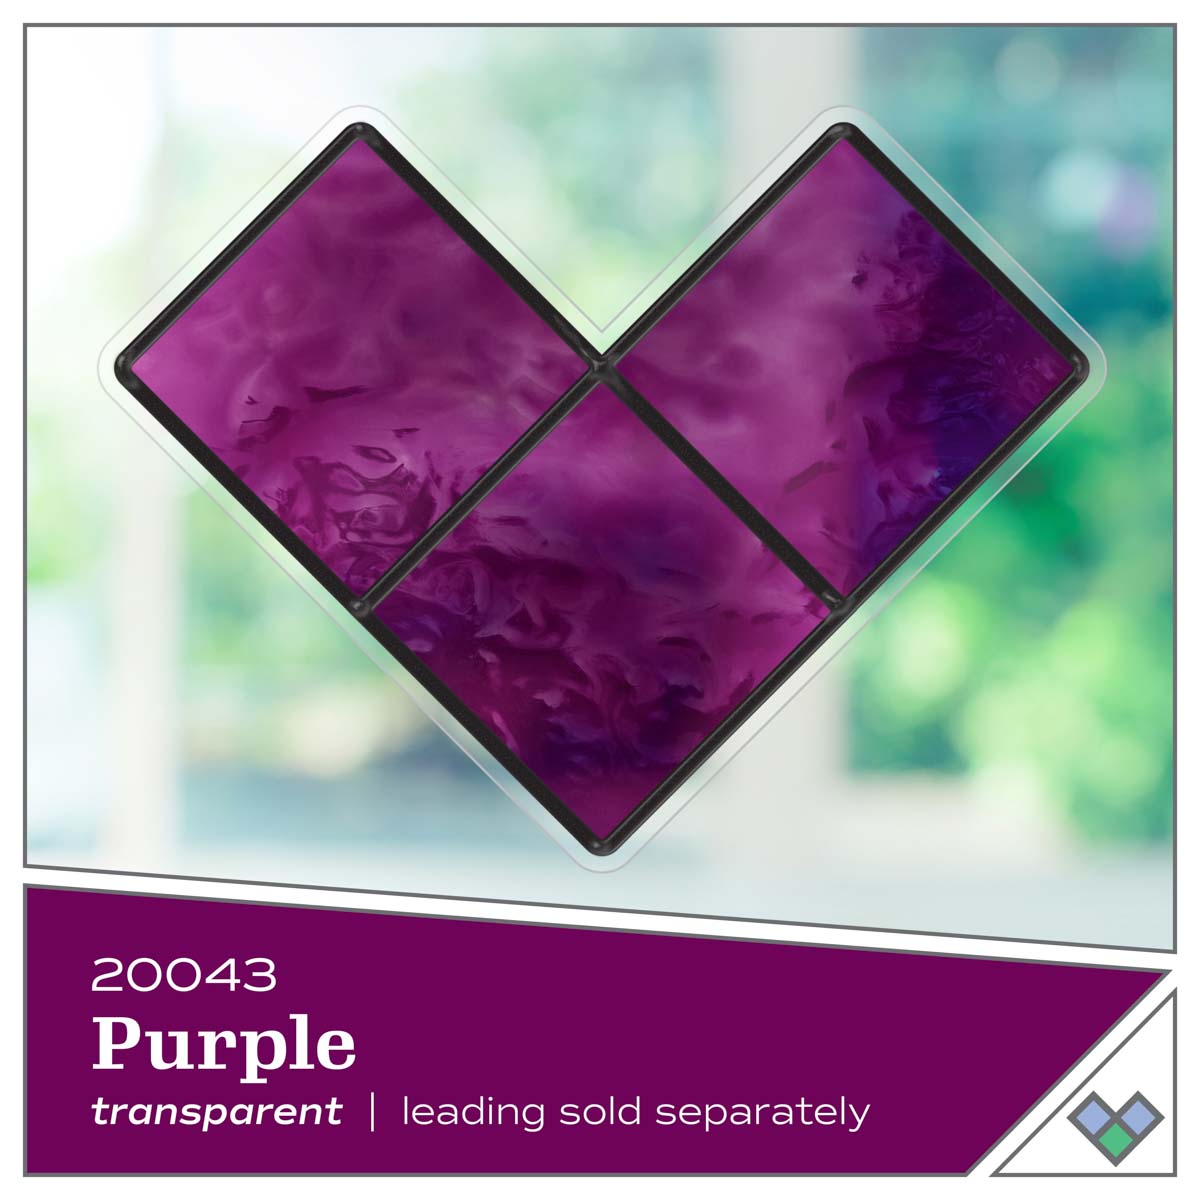 Gallery Glass ® Stained Glass Effect Paint - Purple, 2 oz. - 20043